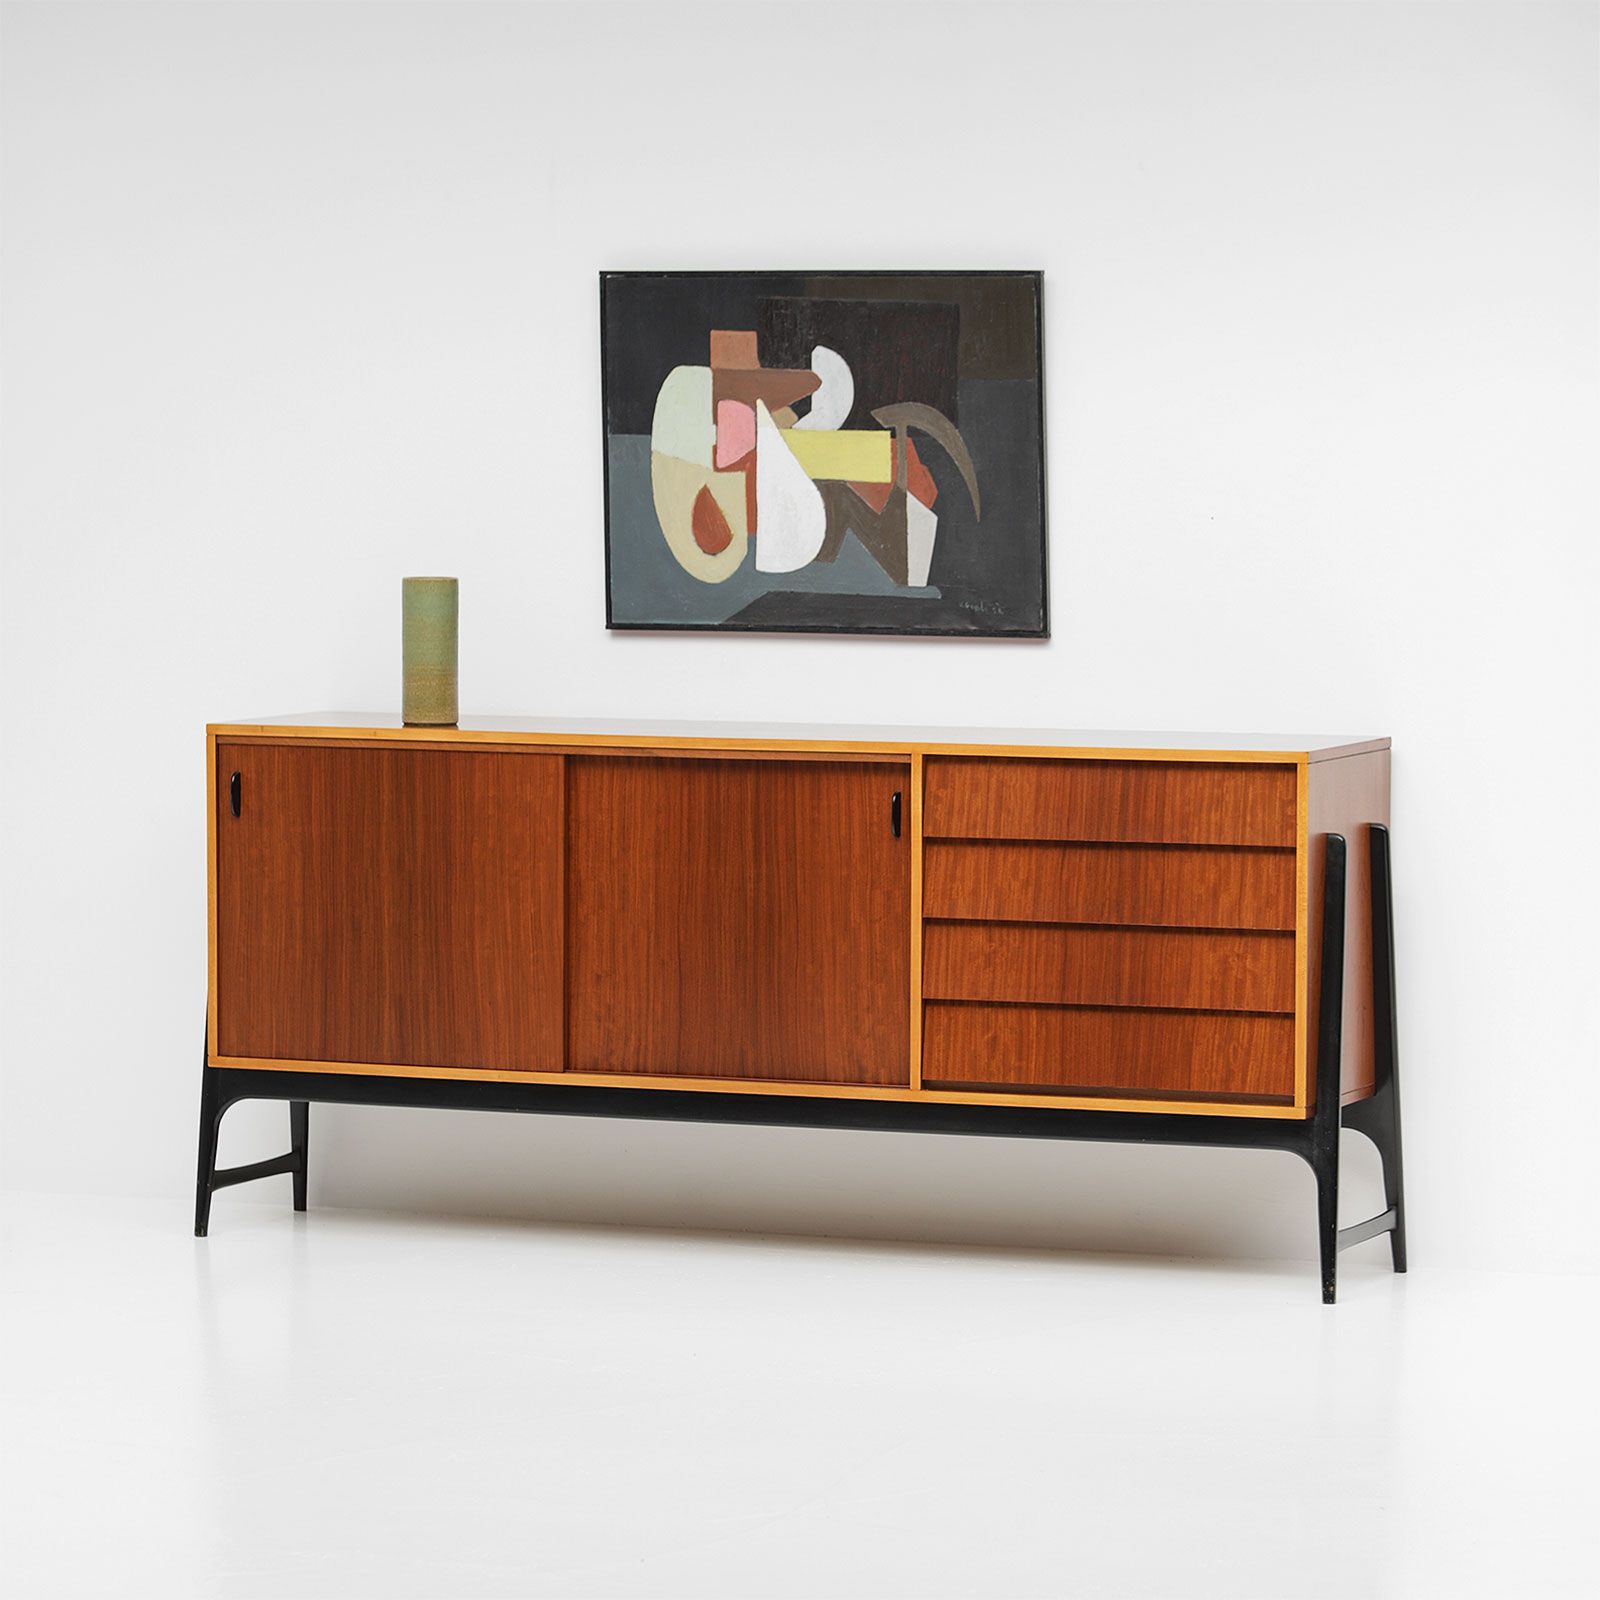 City Furniture: Furniture Archive Pertaining To Modele 7 Geometric Credenzas (View 29 of 30)